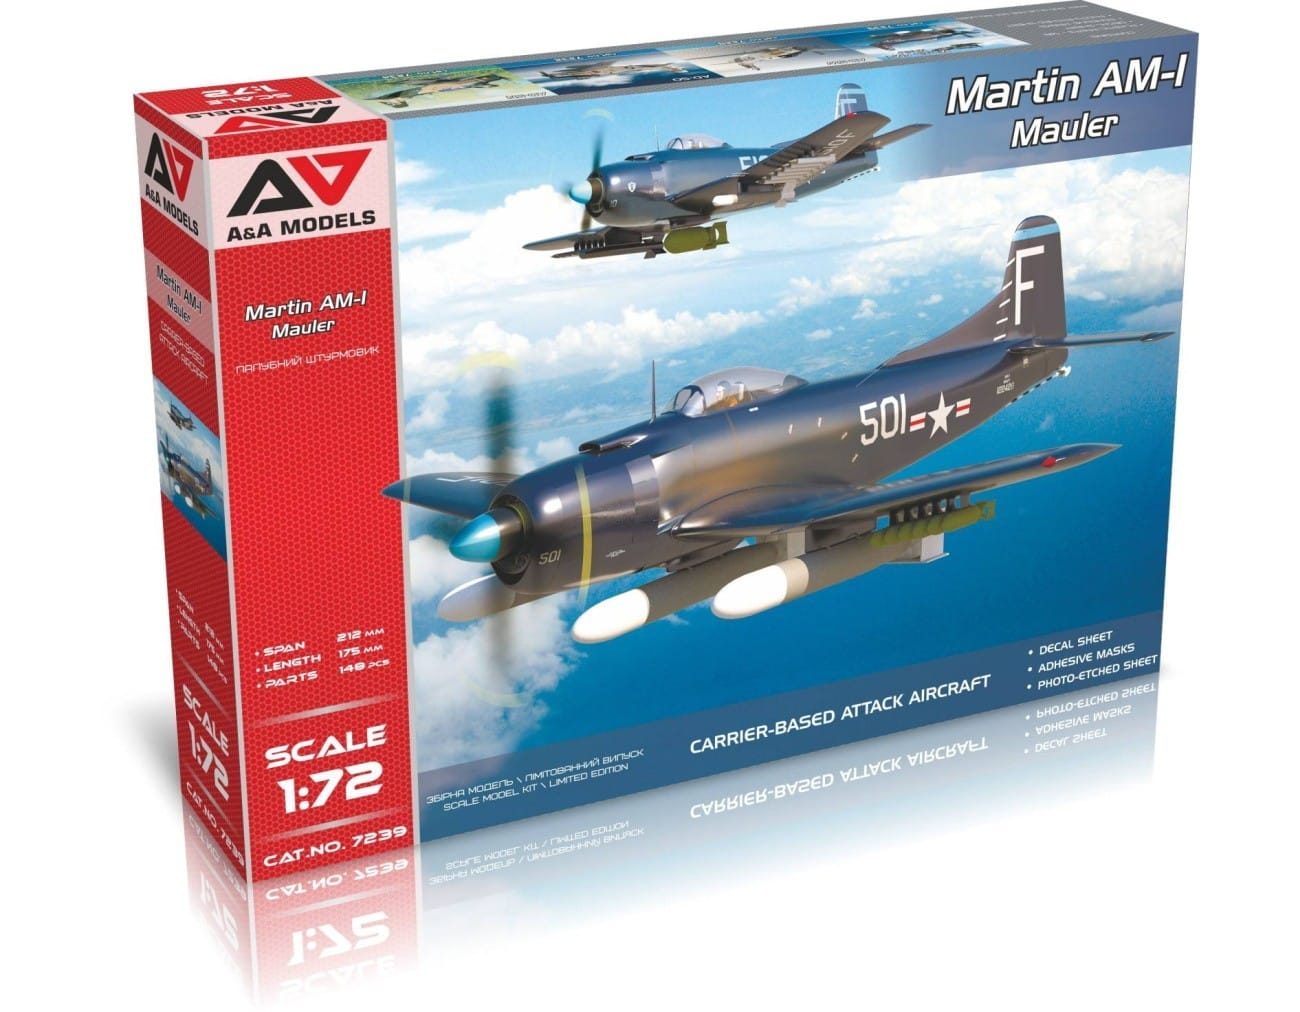 Preview 172 Martin AM-1 Mauler From A&A Models Box